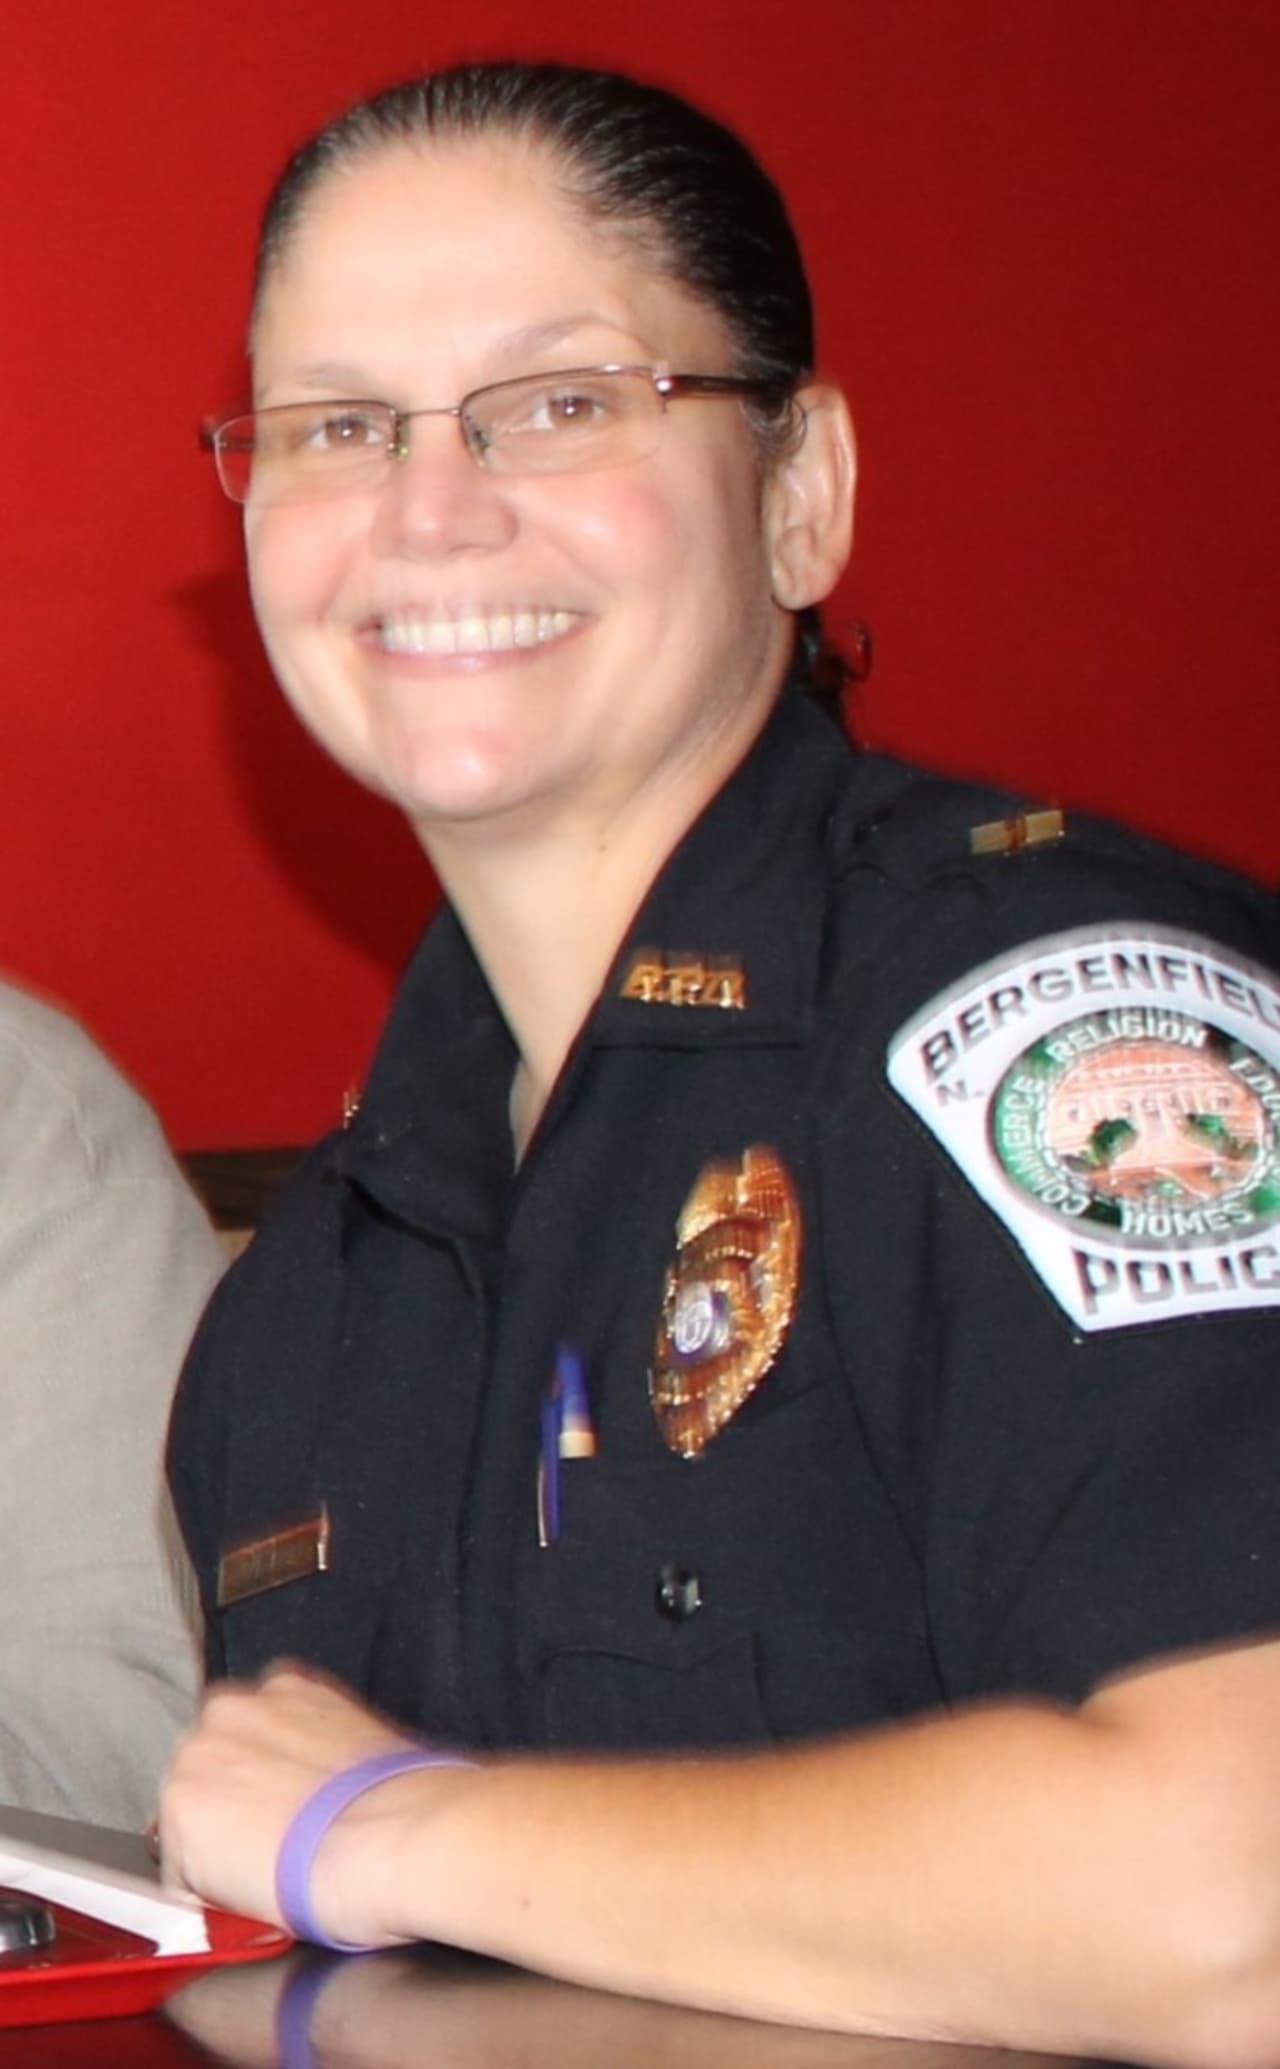 Bergenfield Police Chief Cathy Madalone